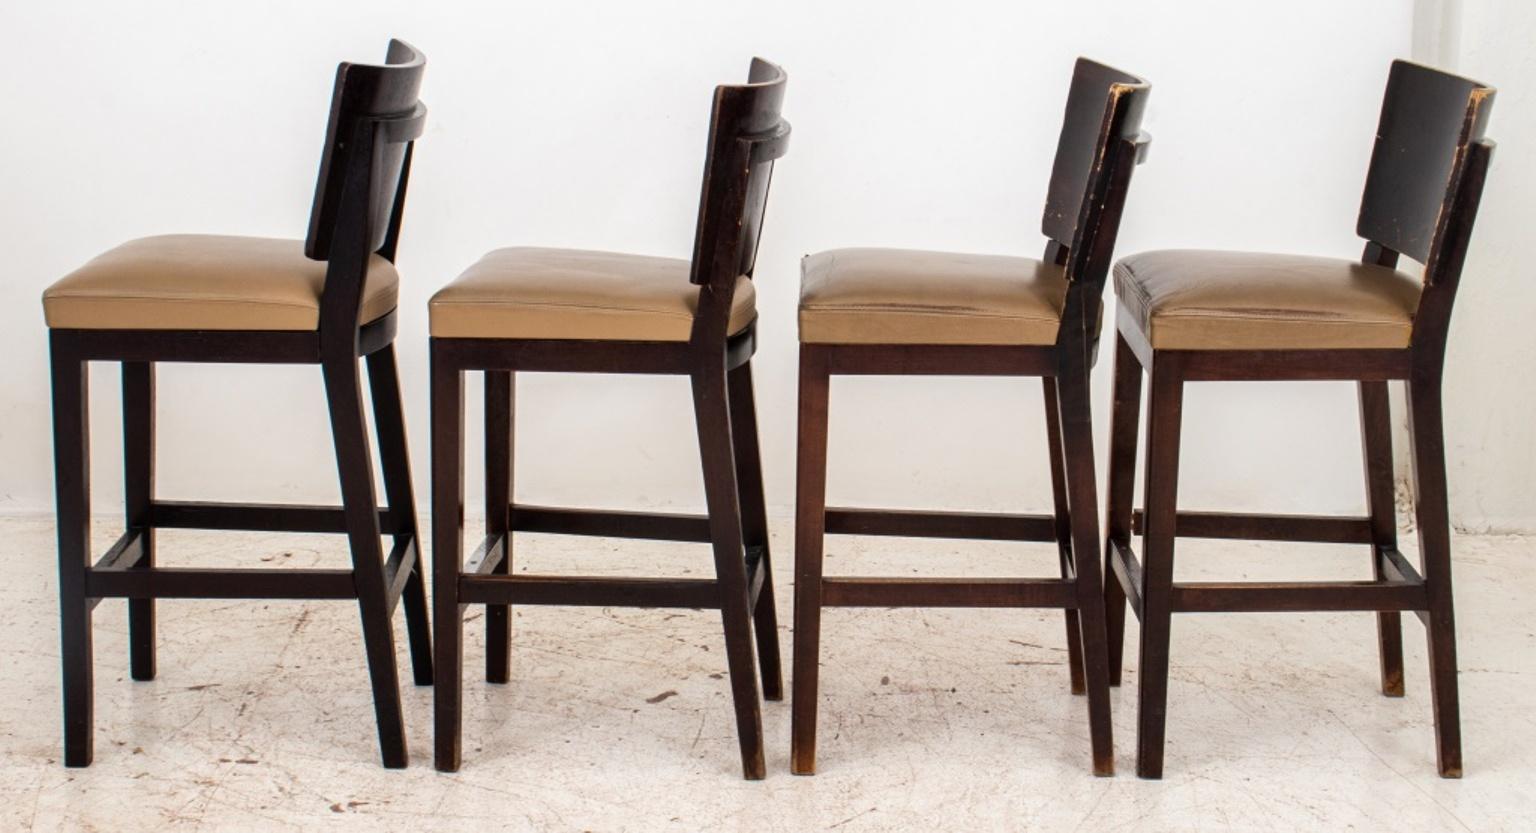 Christian Liaigre (French, 1943-2020) Mercer Kitchen (designed 1997) bar chairs, each with curved back the stained plywood frame with taupe-covered seat above tapering square legs conjoined by stretchers. Measures: 39